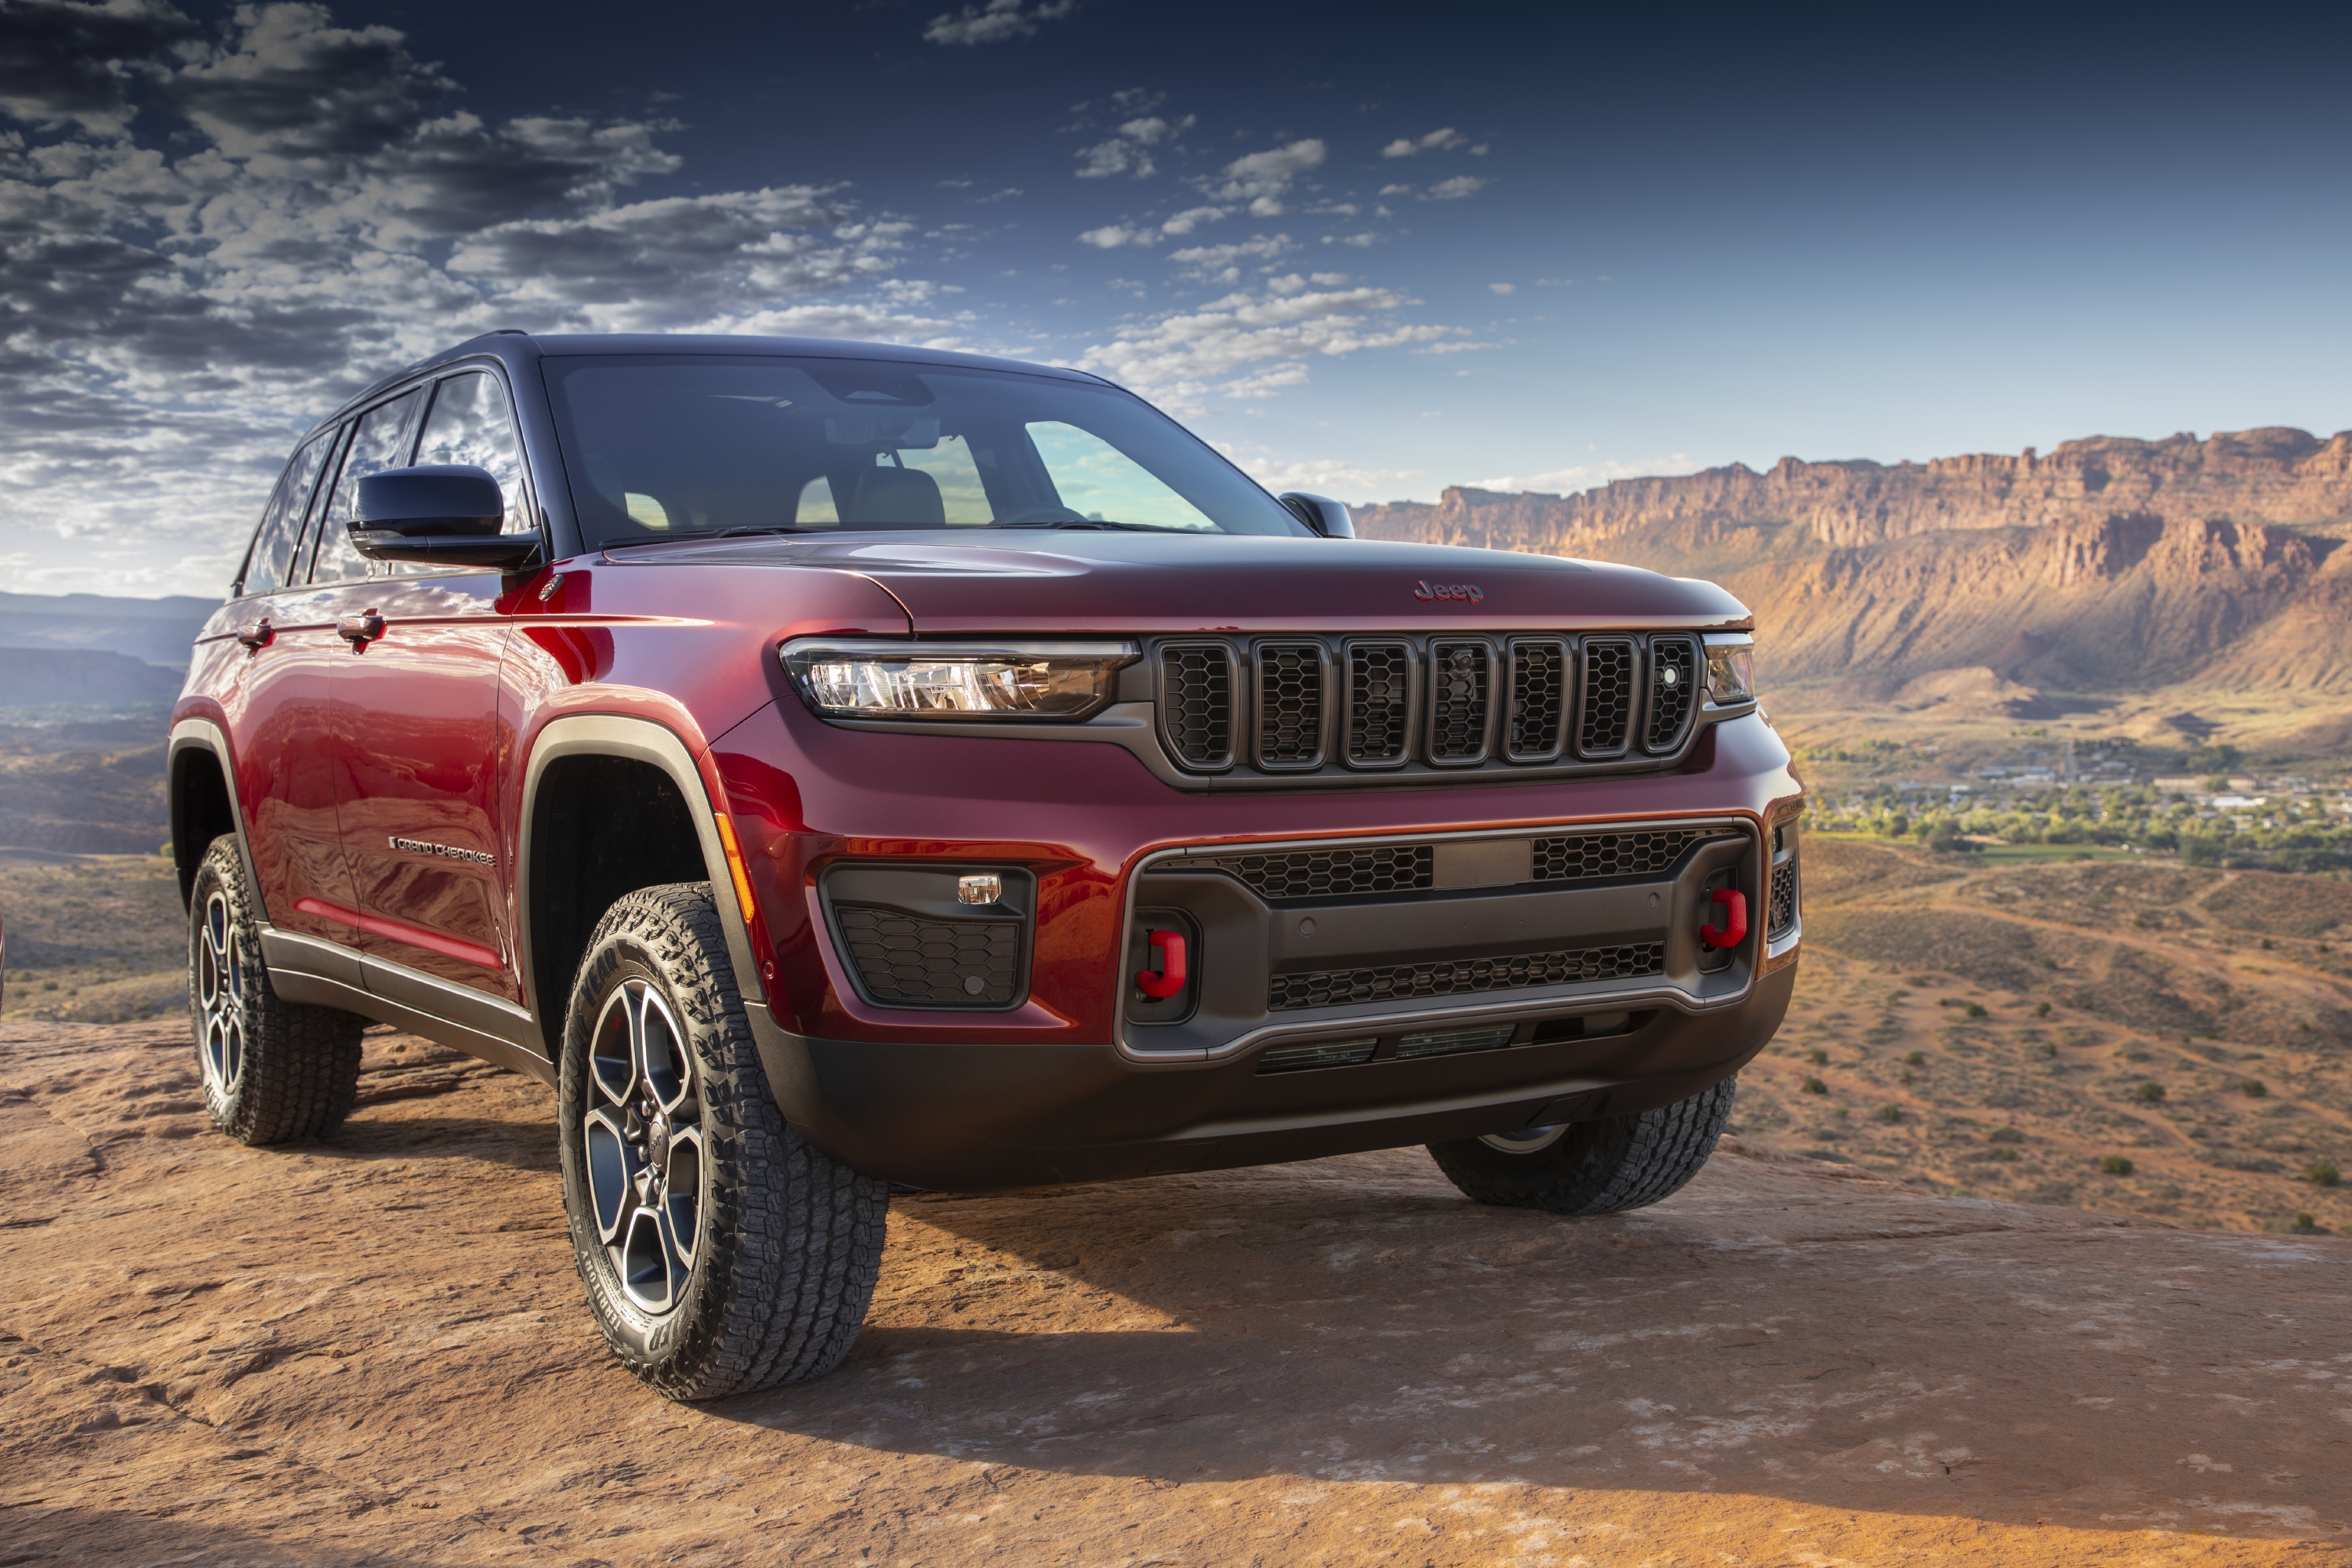 Pricing Revealed for 2022 Jeep Grand Cherokee Lineup